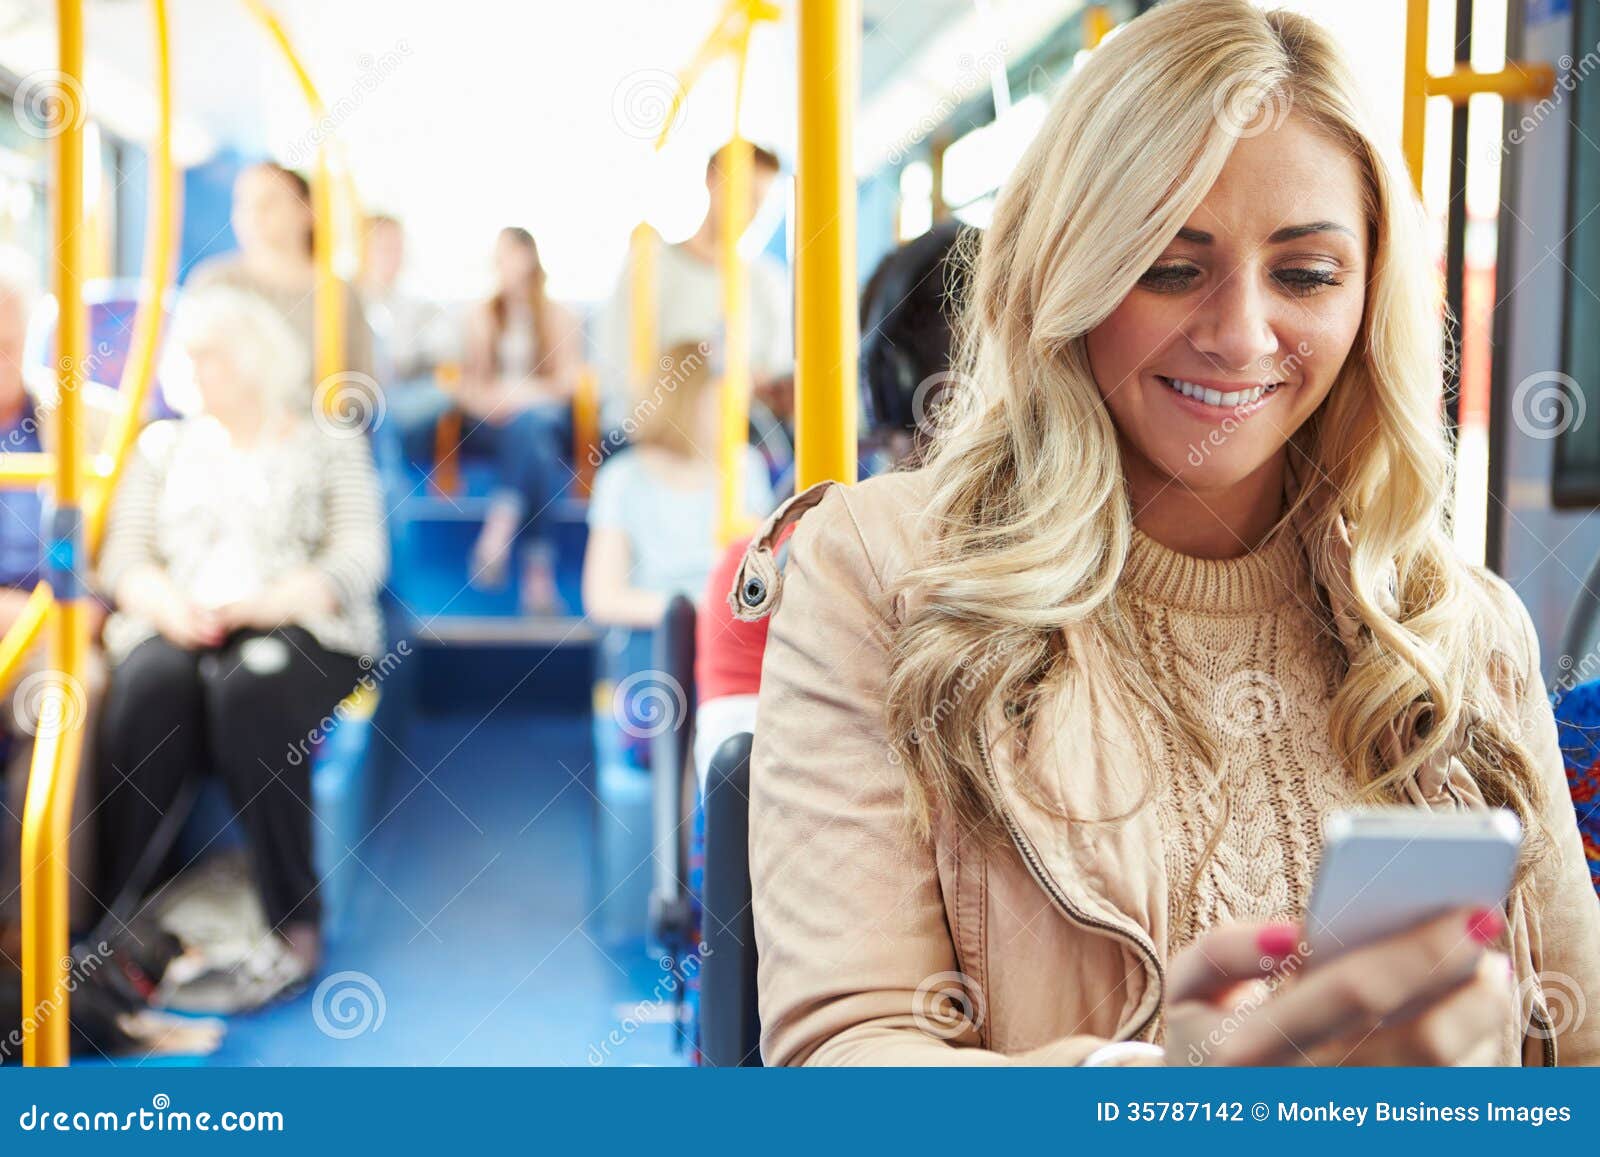 woman reading text message on bus